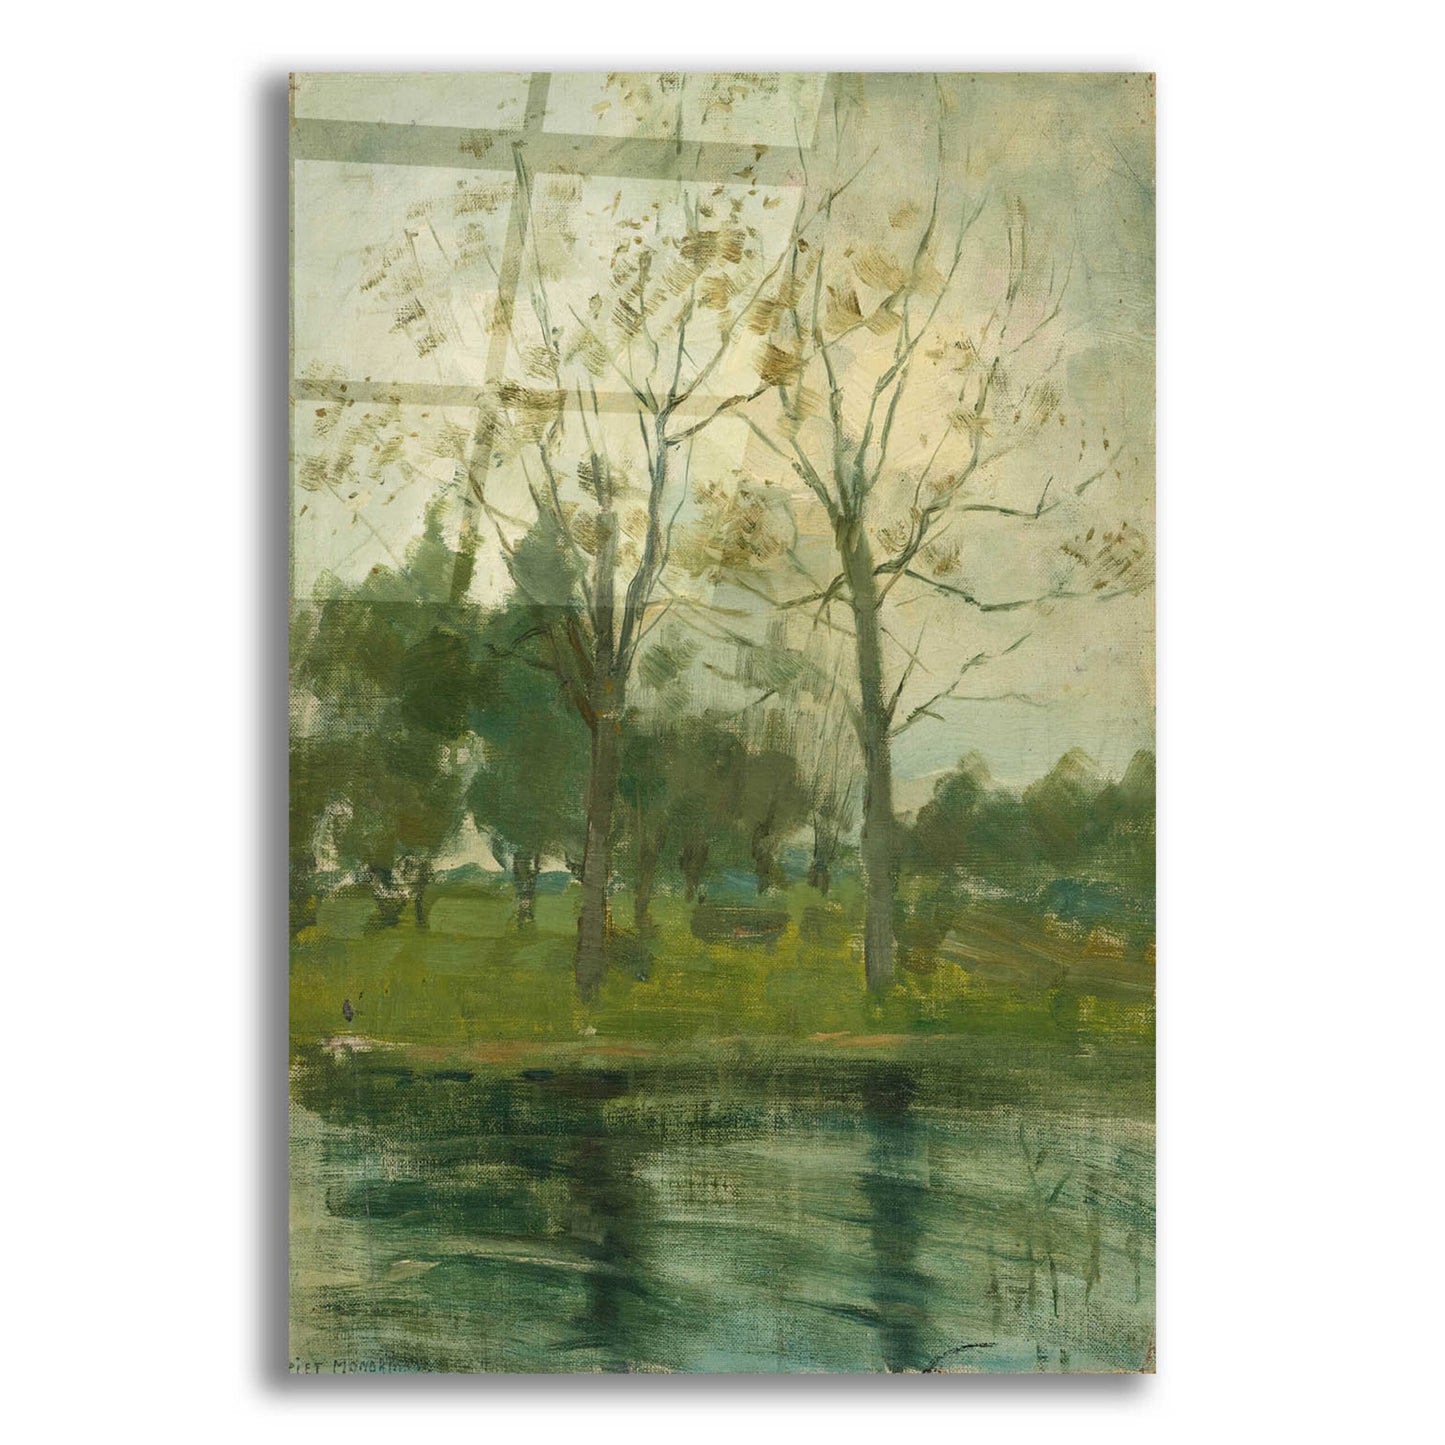 Epic Art 'Two Trees Silhouetted Behind A Water Course, 1900-02' by Piet Mondrian, Acrylic Glass Wall Art,12x16